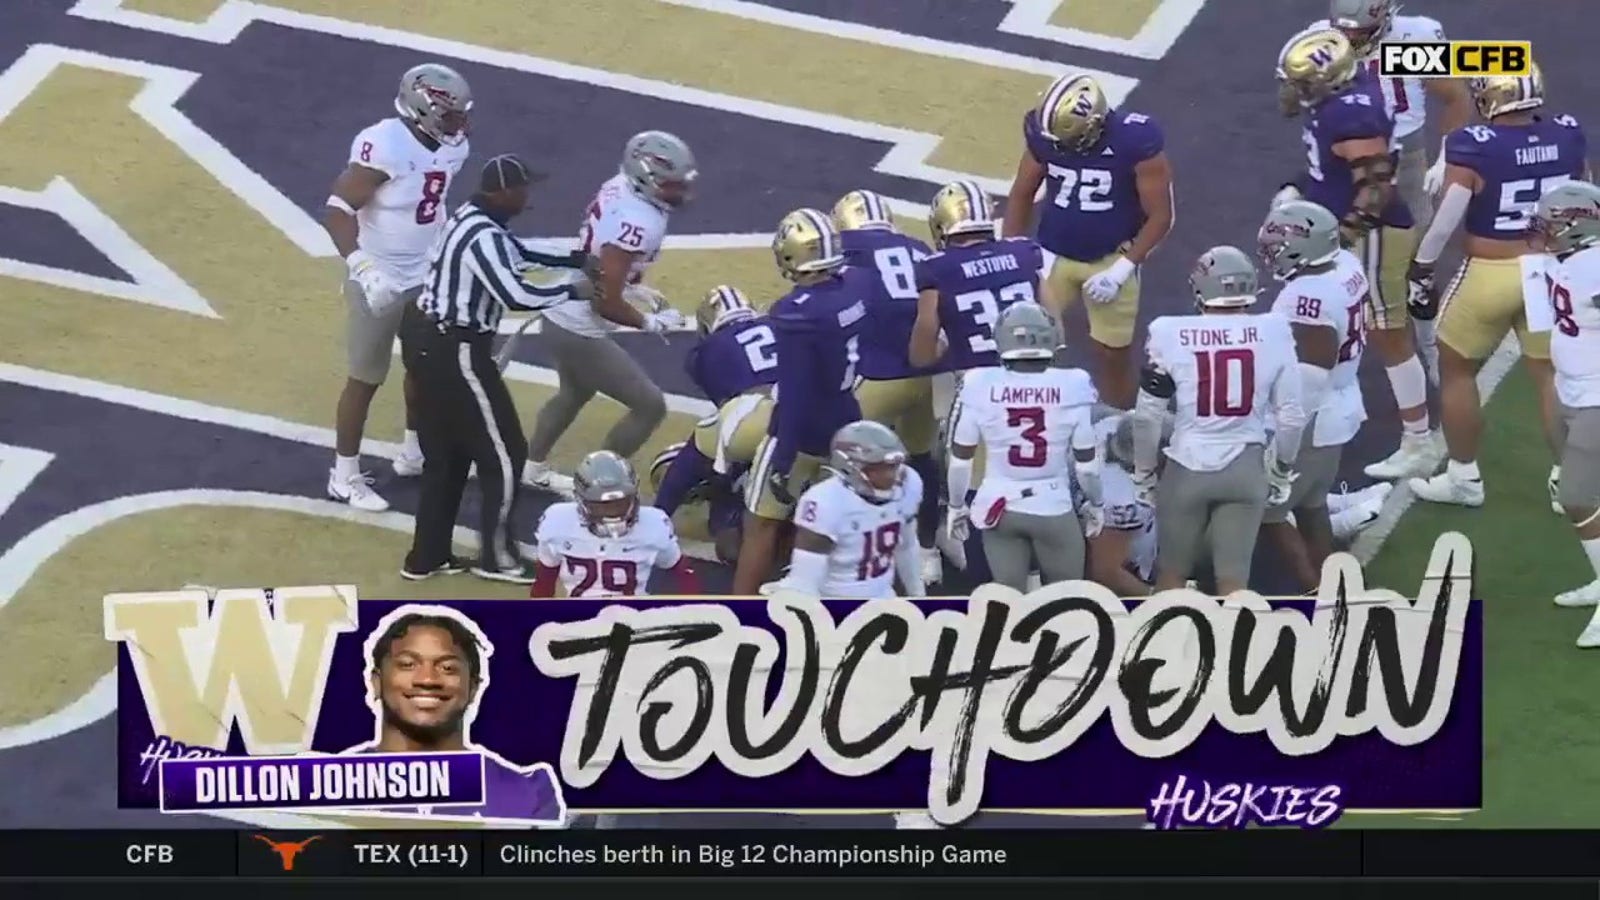 Dillon Johnson punches in a 1-yard TD to give Washington the lead